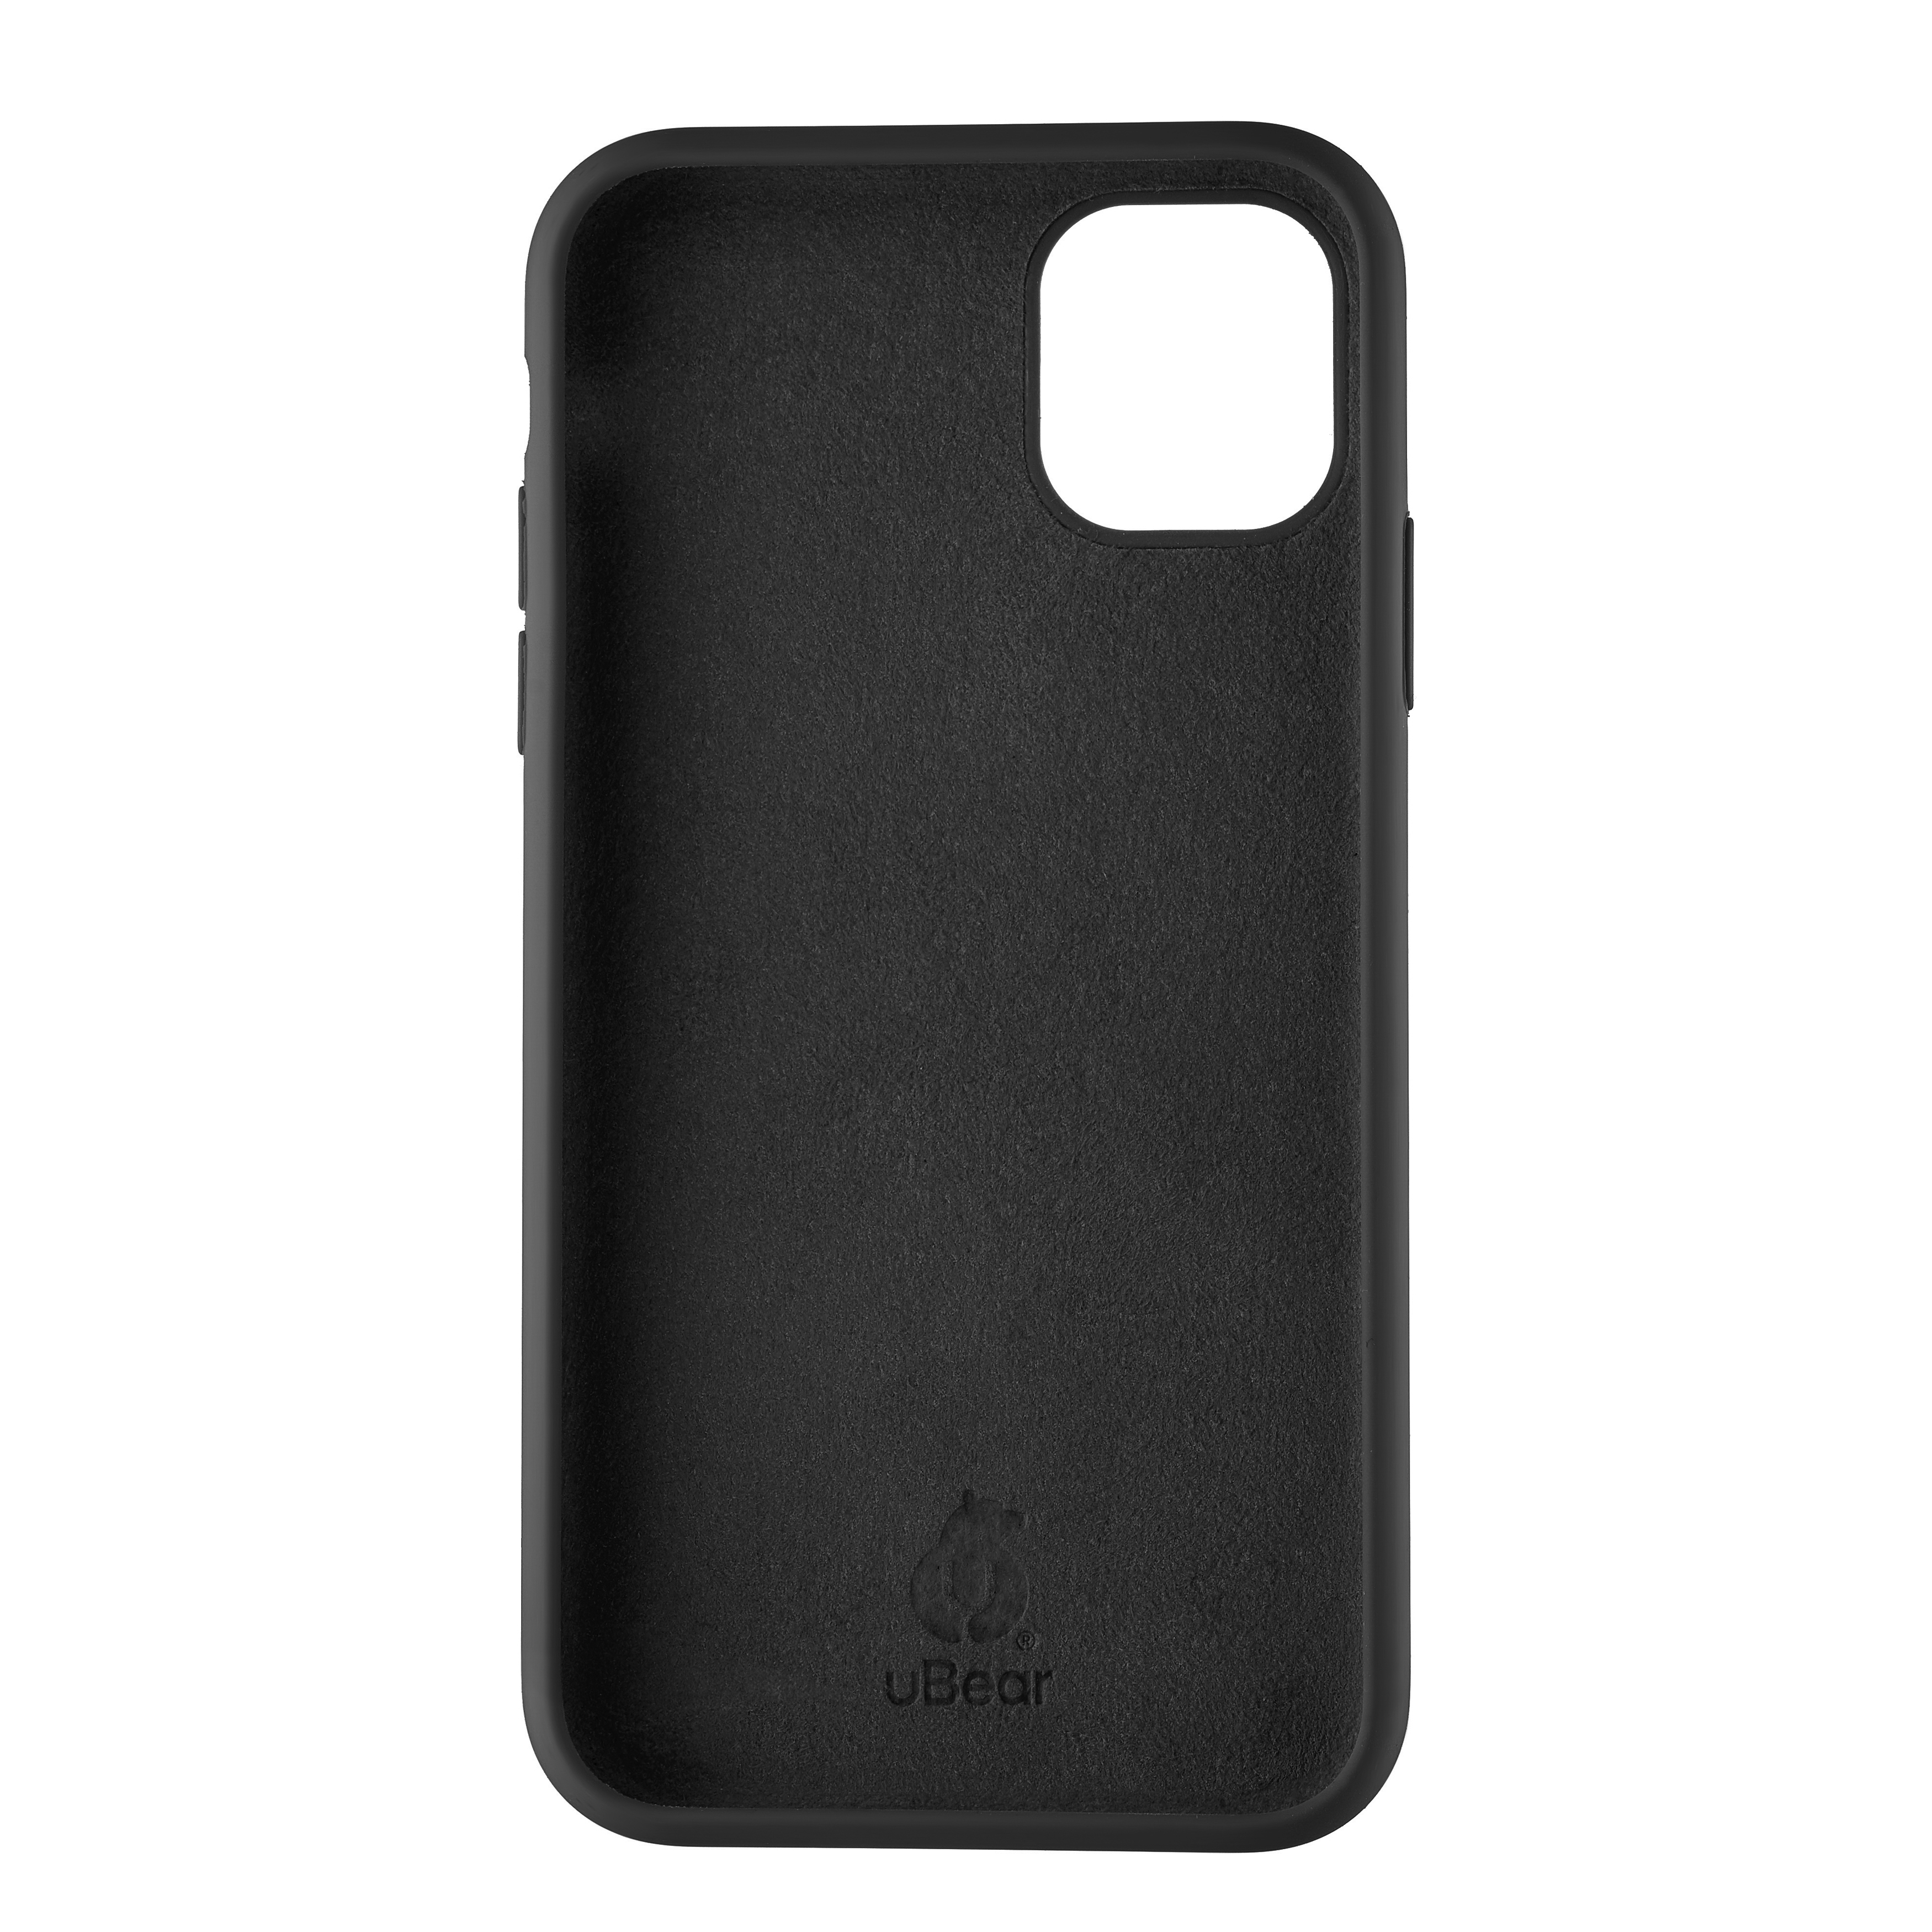 Touch Case for iPhone 11 (силикон soft touch), чёрный